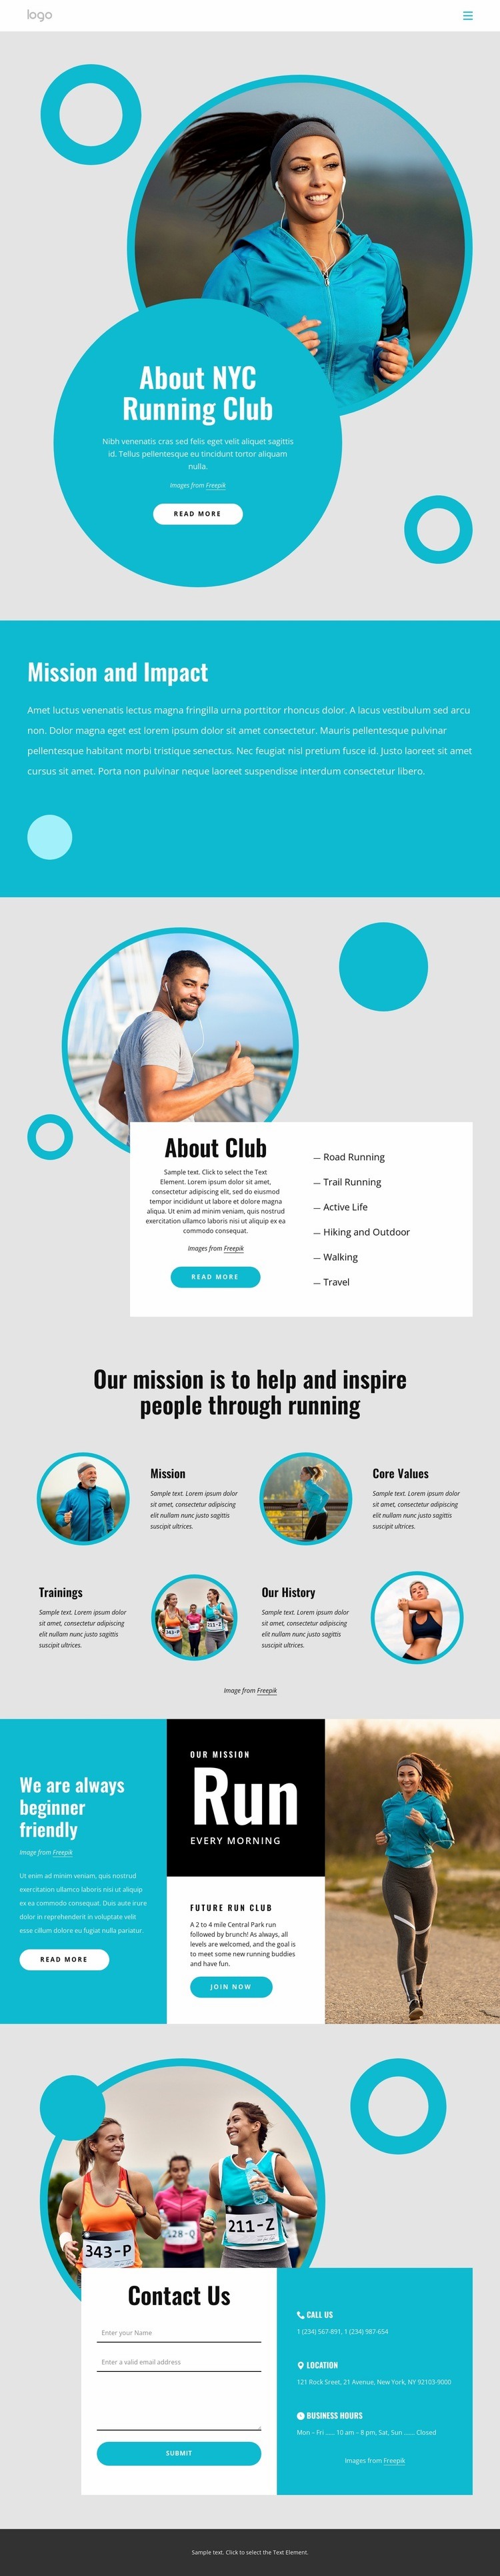 About NYC running club Html Code Example